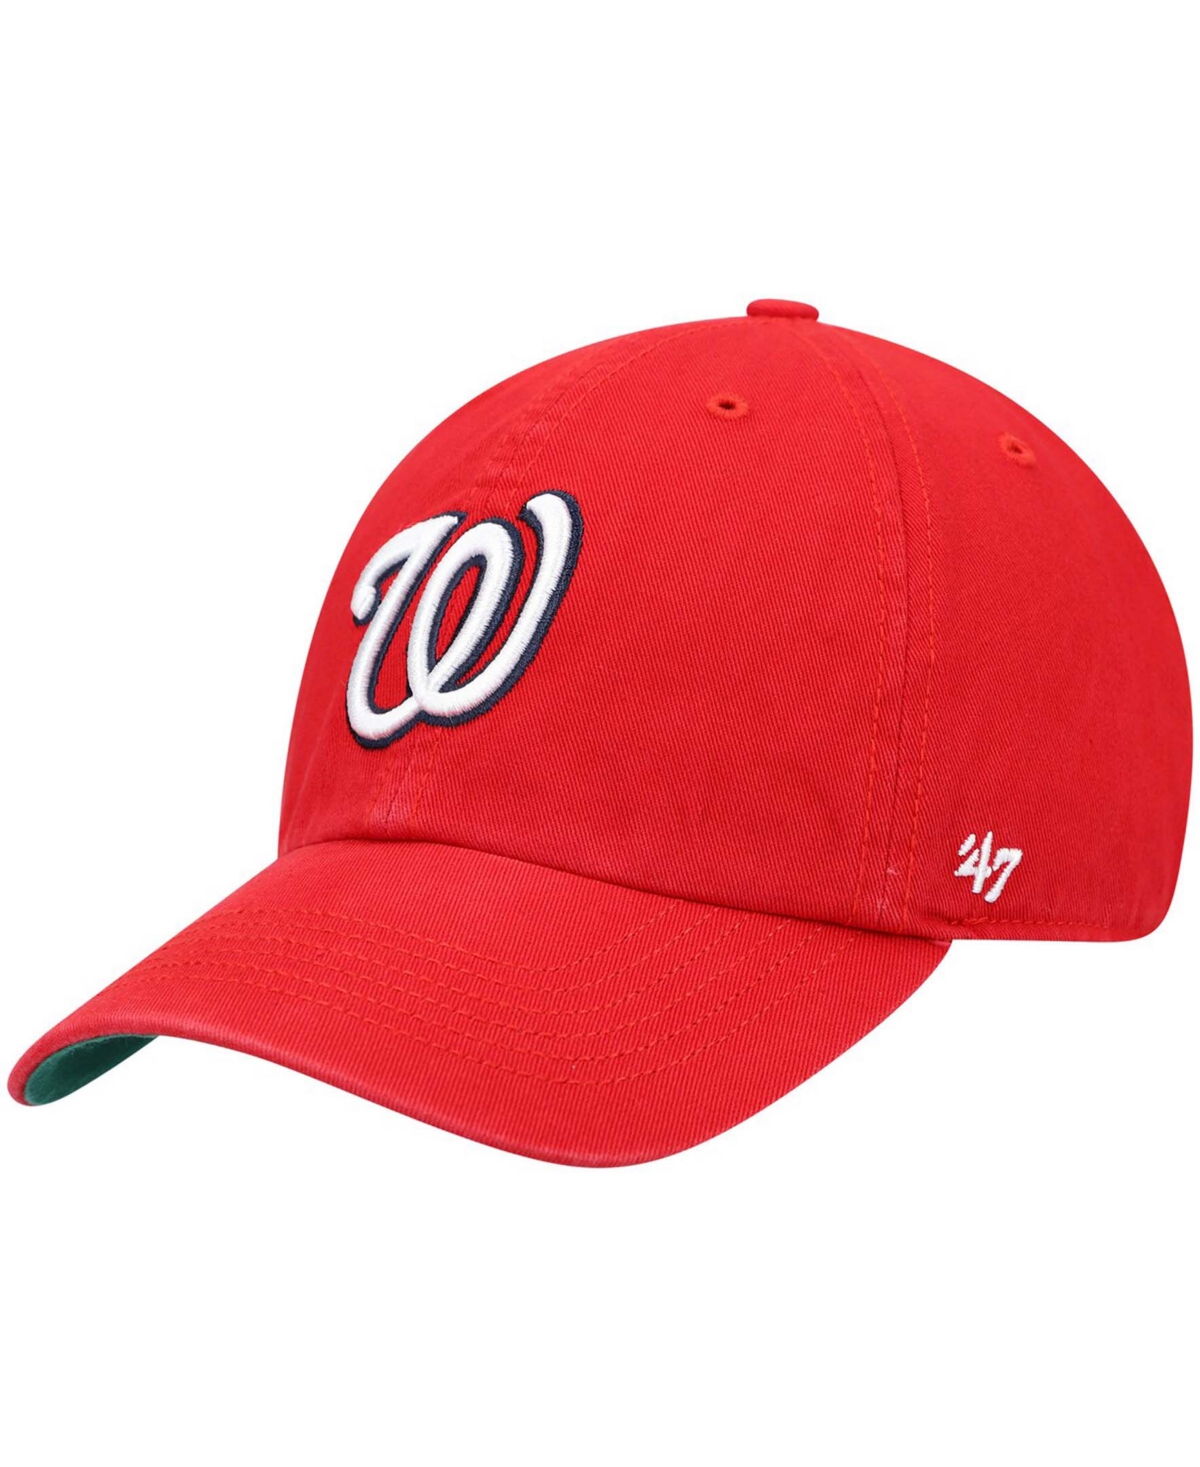 47 Brand Men's Washington Nationals Team Franchise Fitted Cap In Red